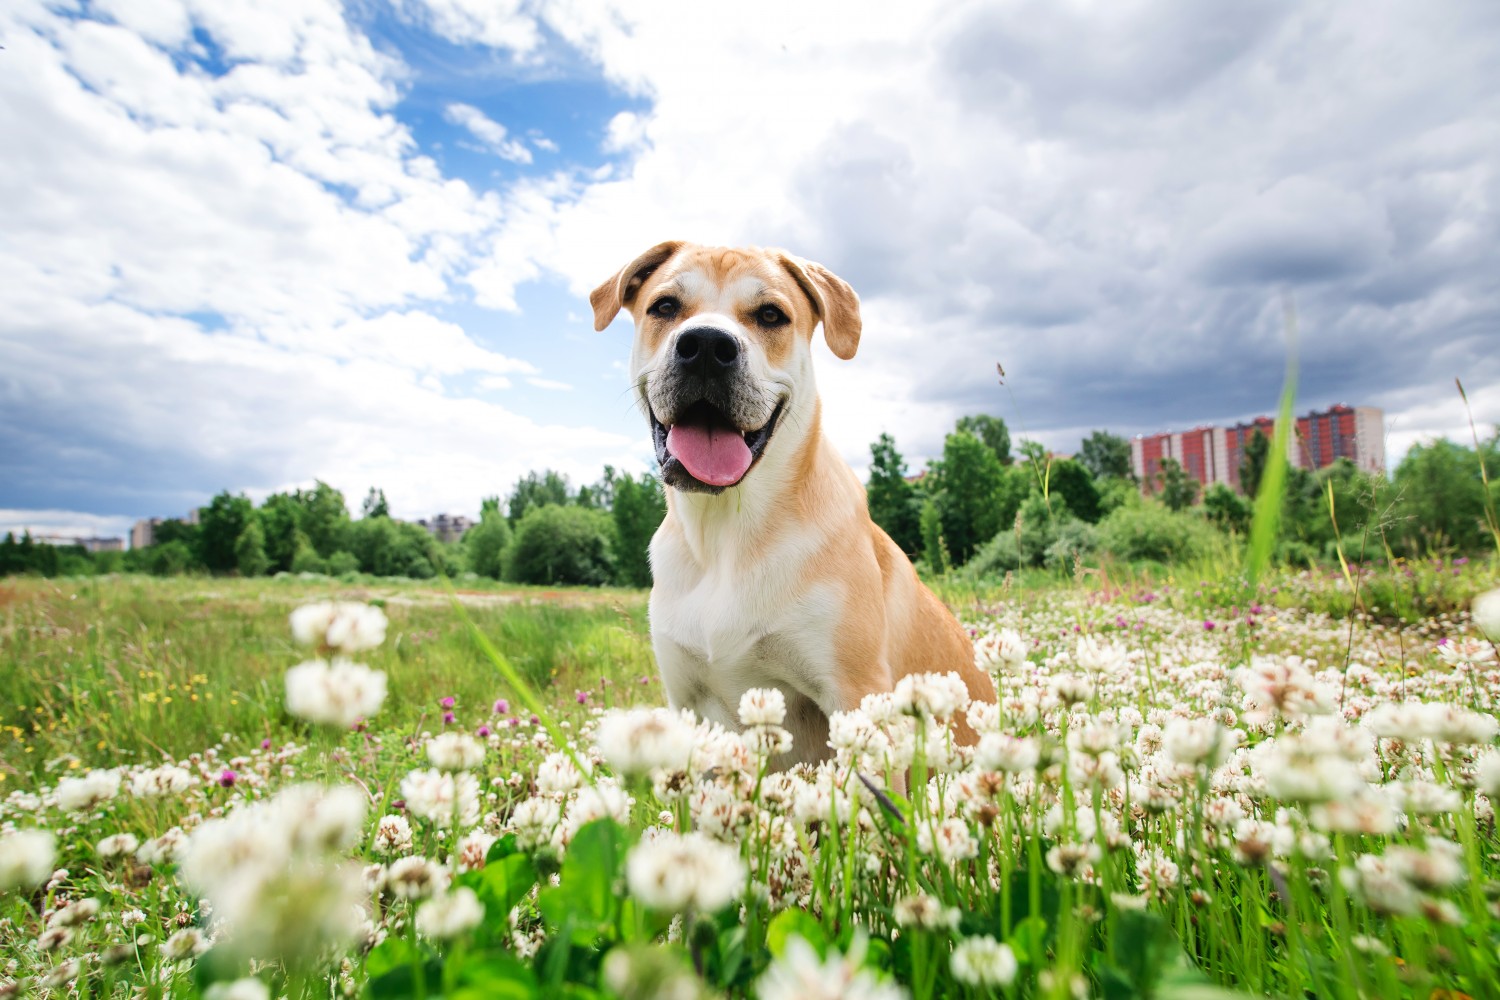 Dog Sitting in a Field of Flowers